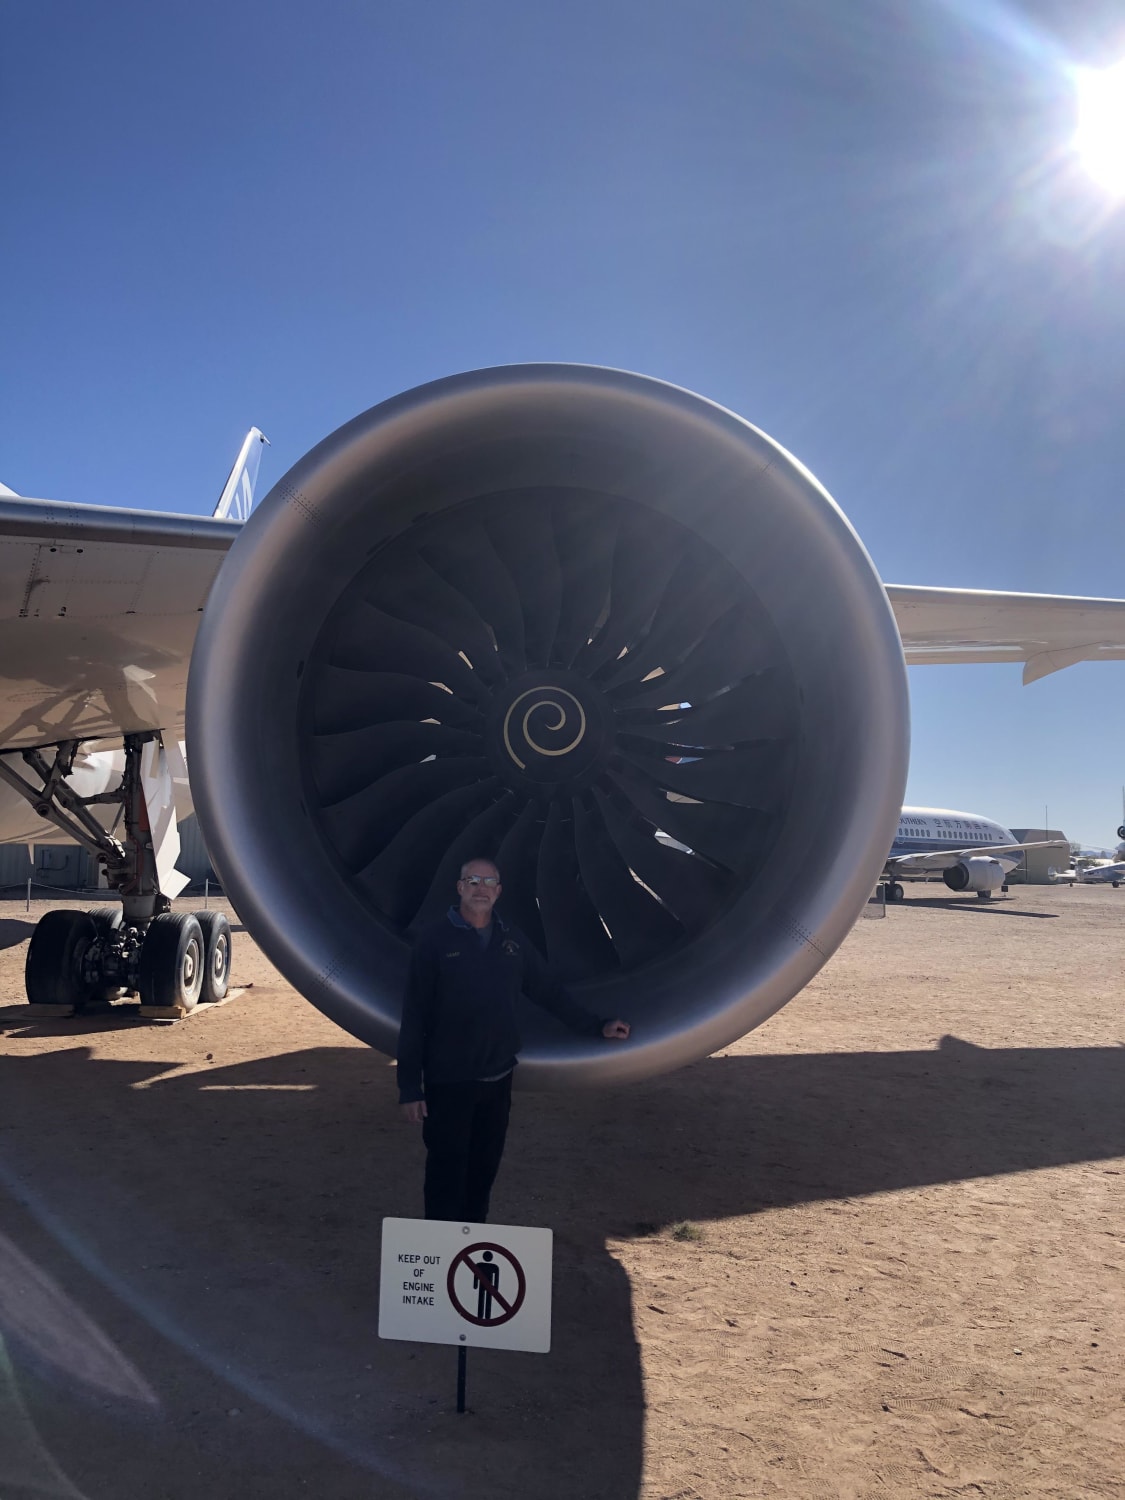 My dad standing in front of the engine intake on a prototype Boeing 787. Taken at Pima Air & Space Museum in Tucson, AZ